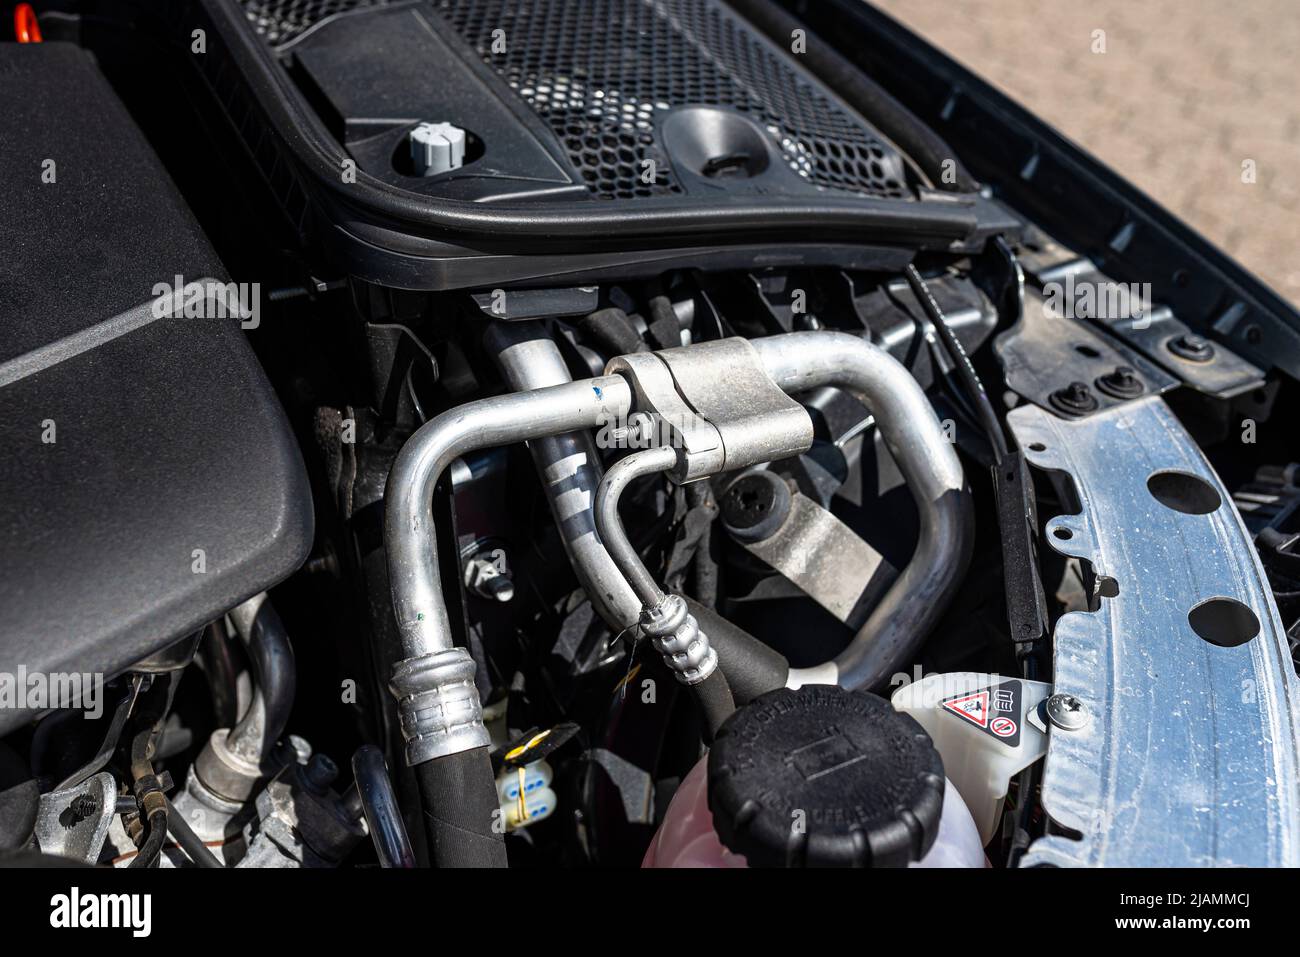 Aluminum air conditioning tubes with a cap, located in the diesel engine compartment. Stock Photo